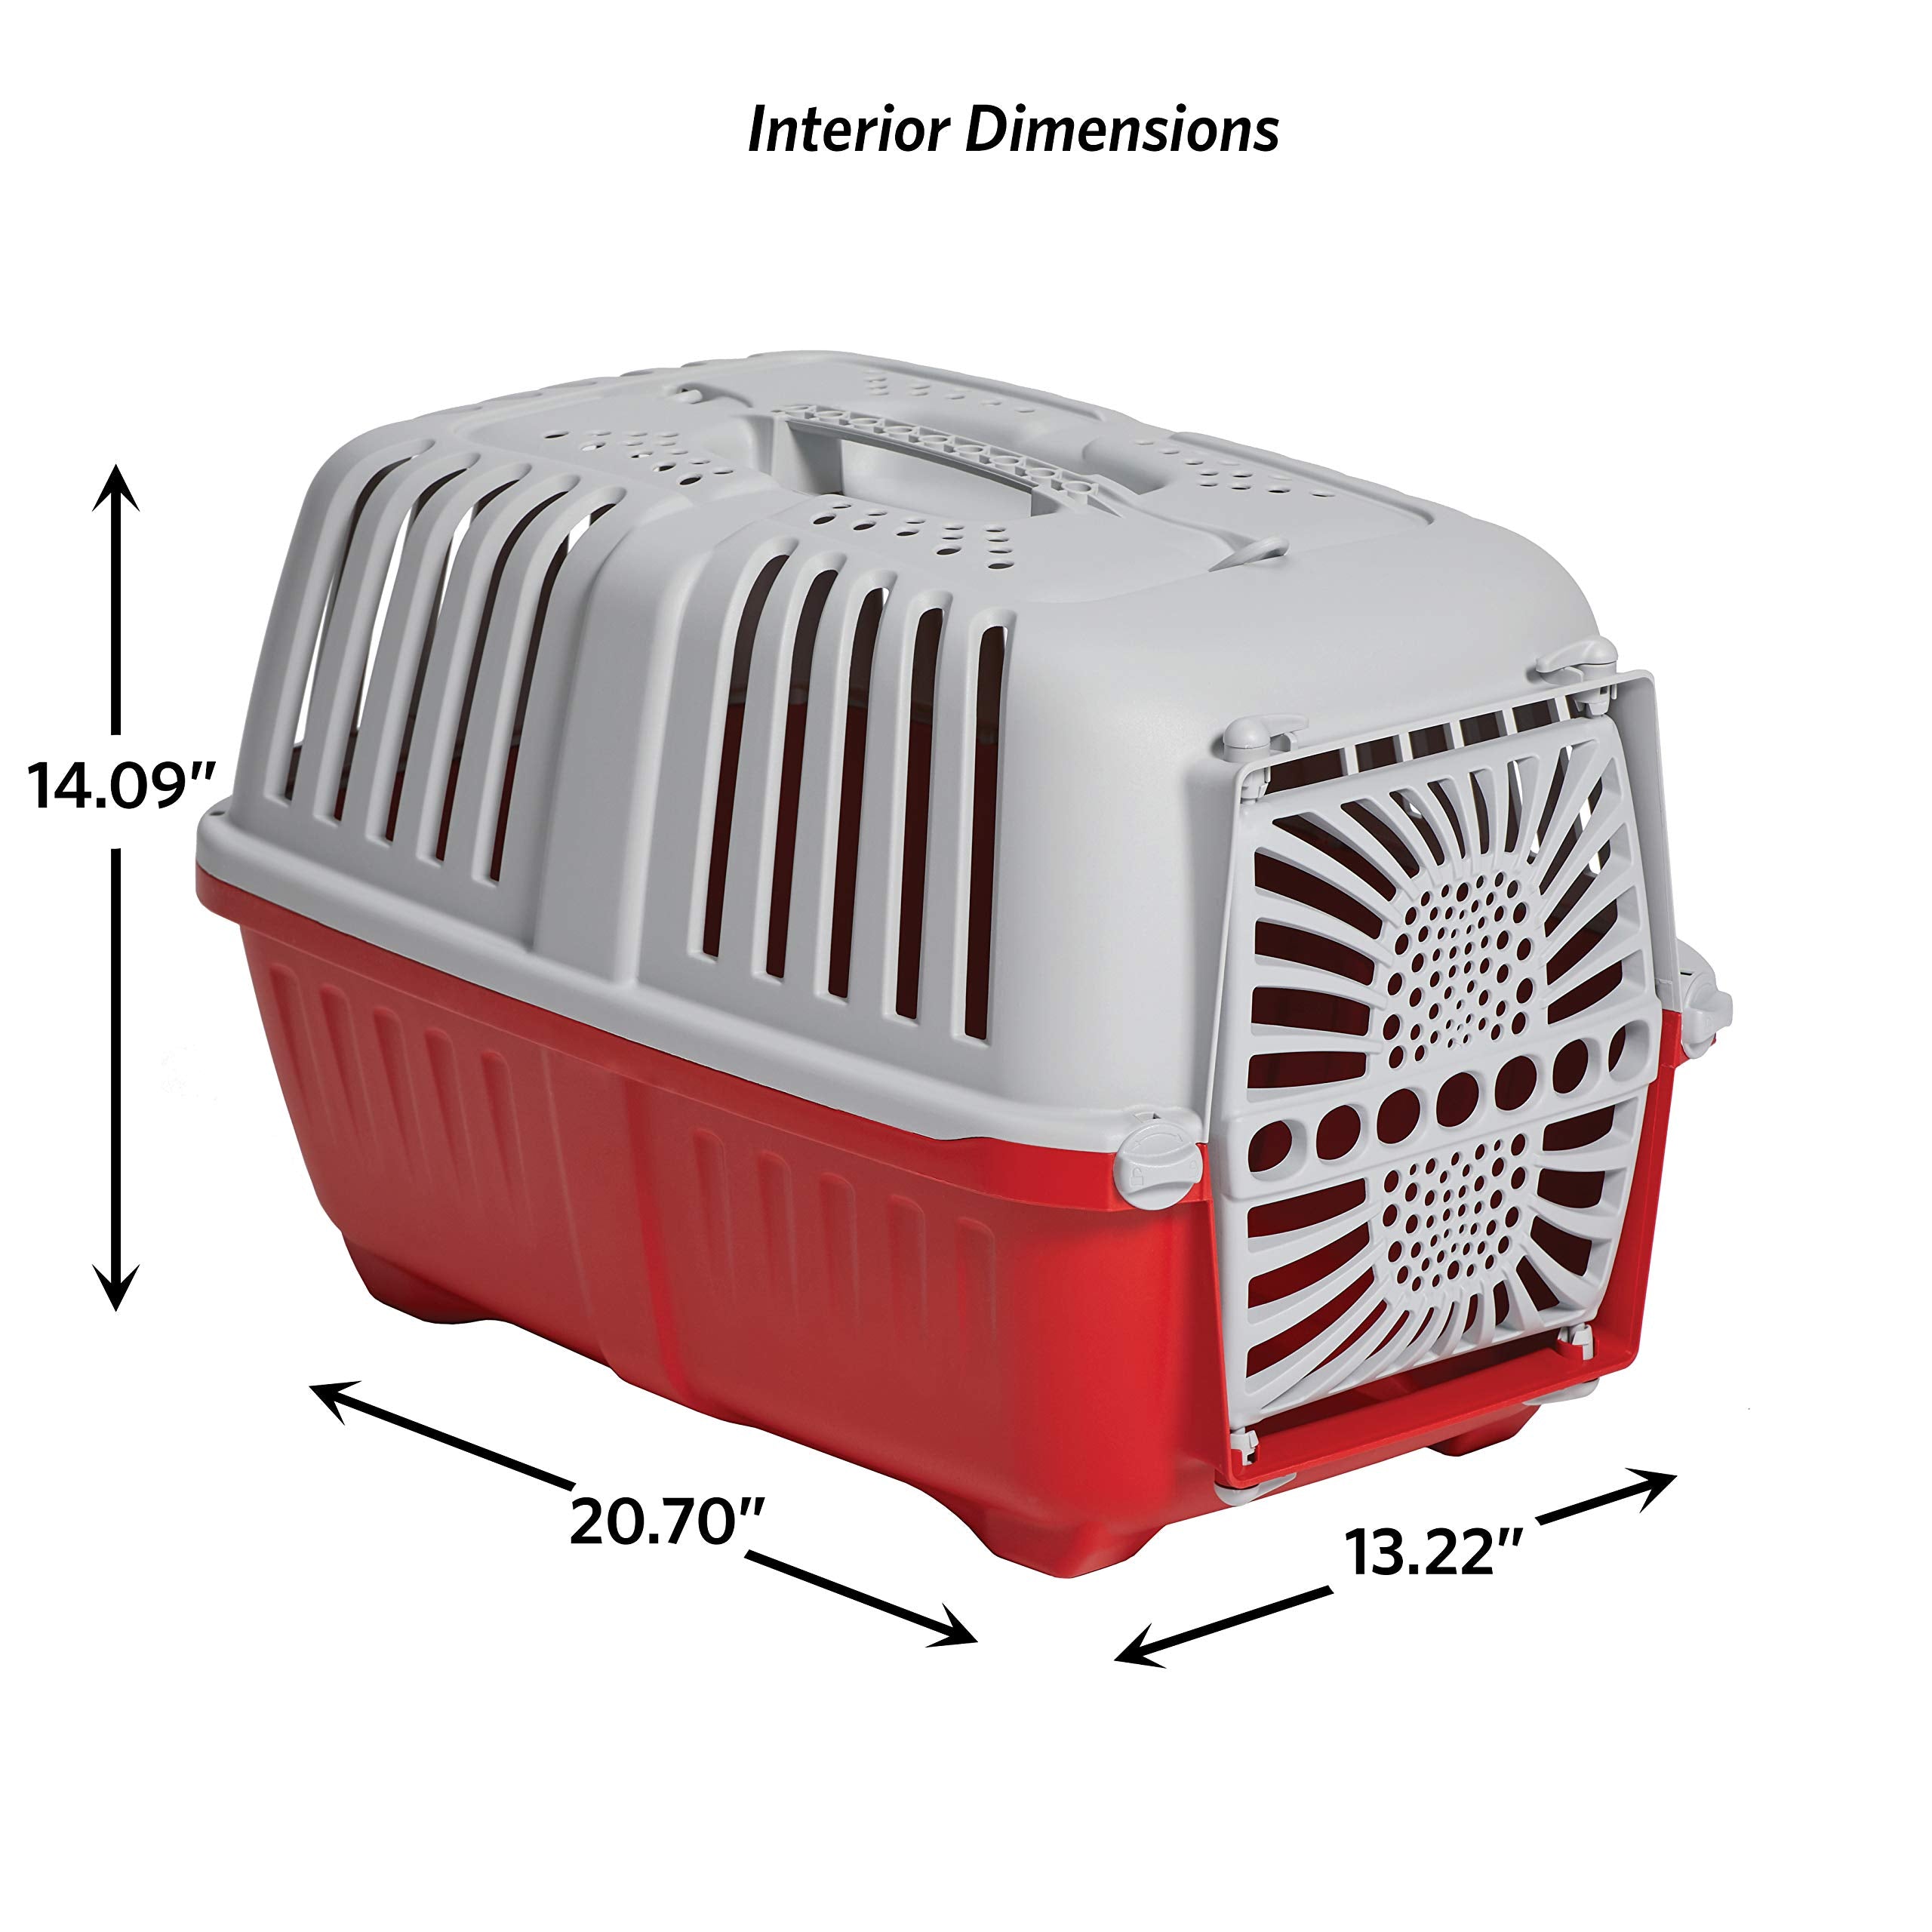 Midwest Spree Hard-Sided Travel Cat and Dog Kennel Carrier - Red - 22